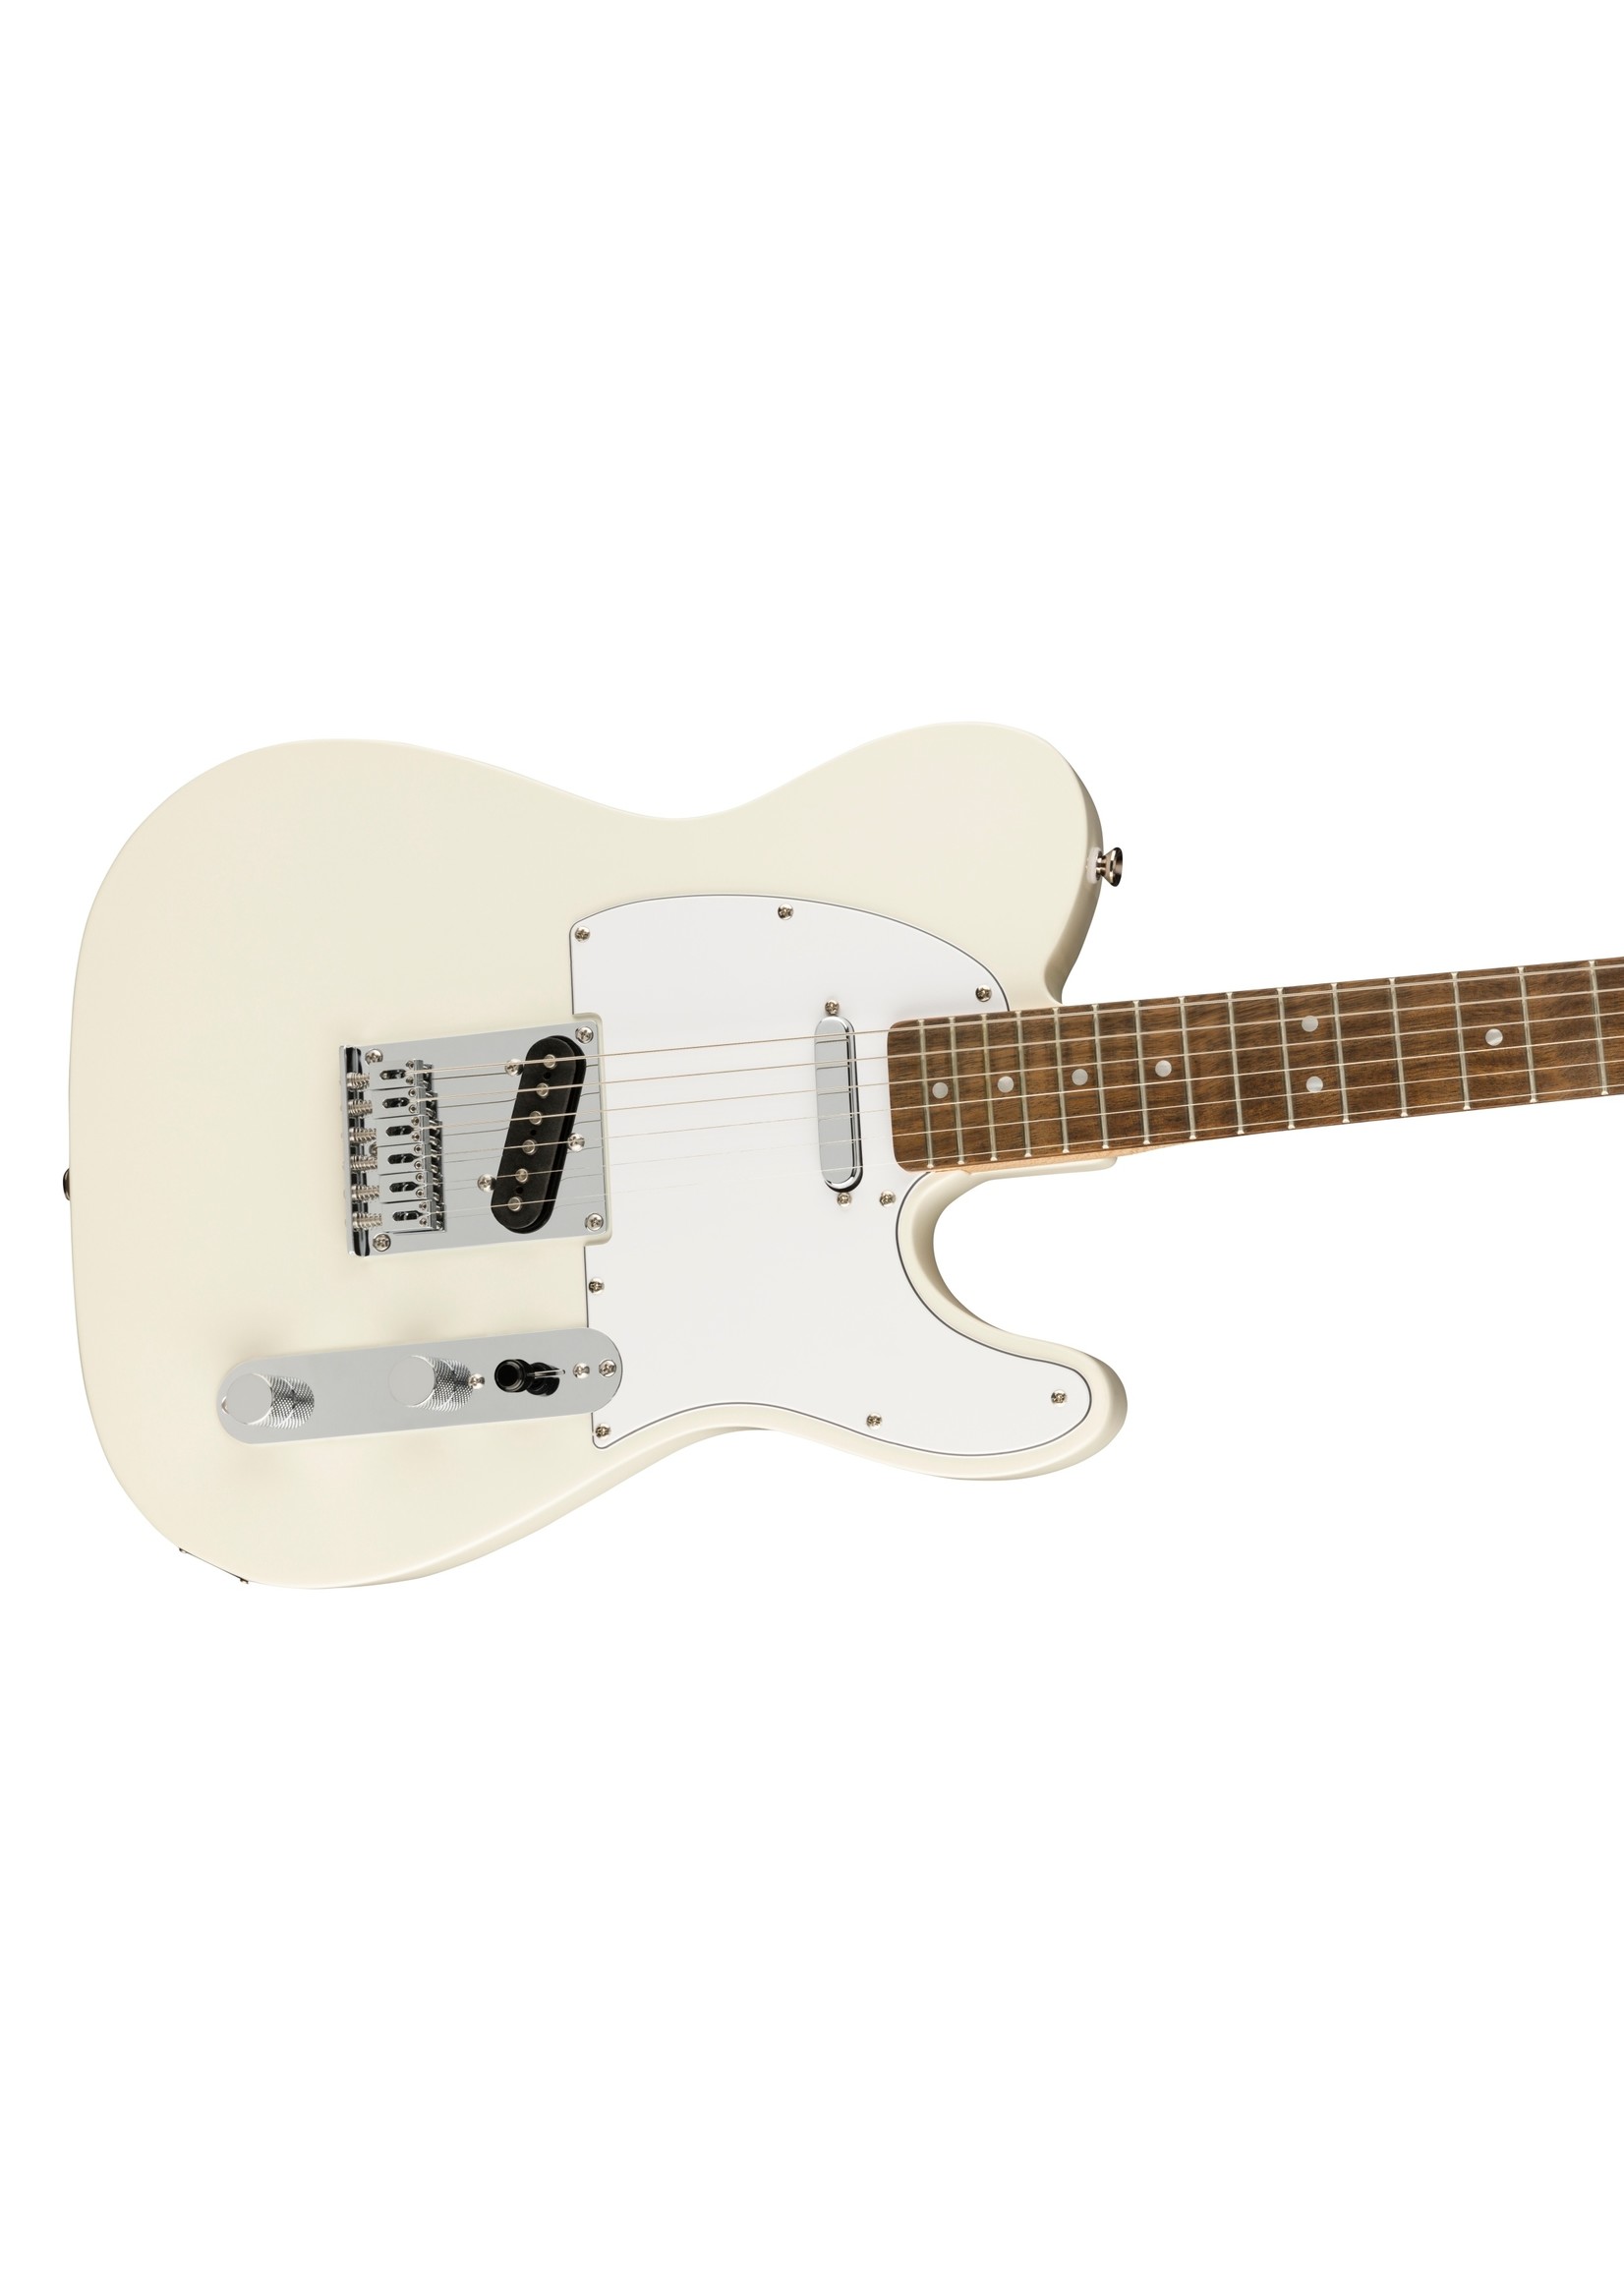 Squier Squier Affinity Series Telecaster, Laurel Fingerboard, White Pickguard, Olympic White